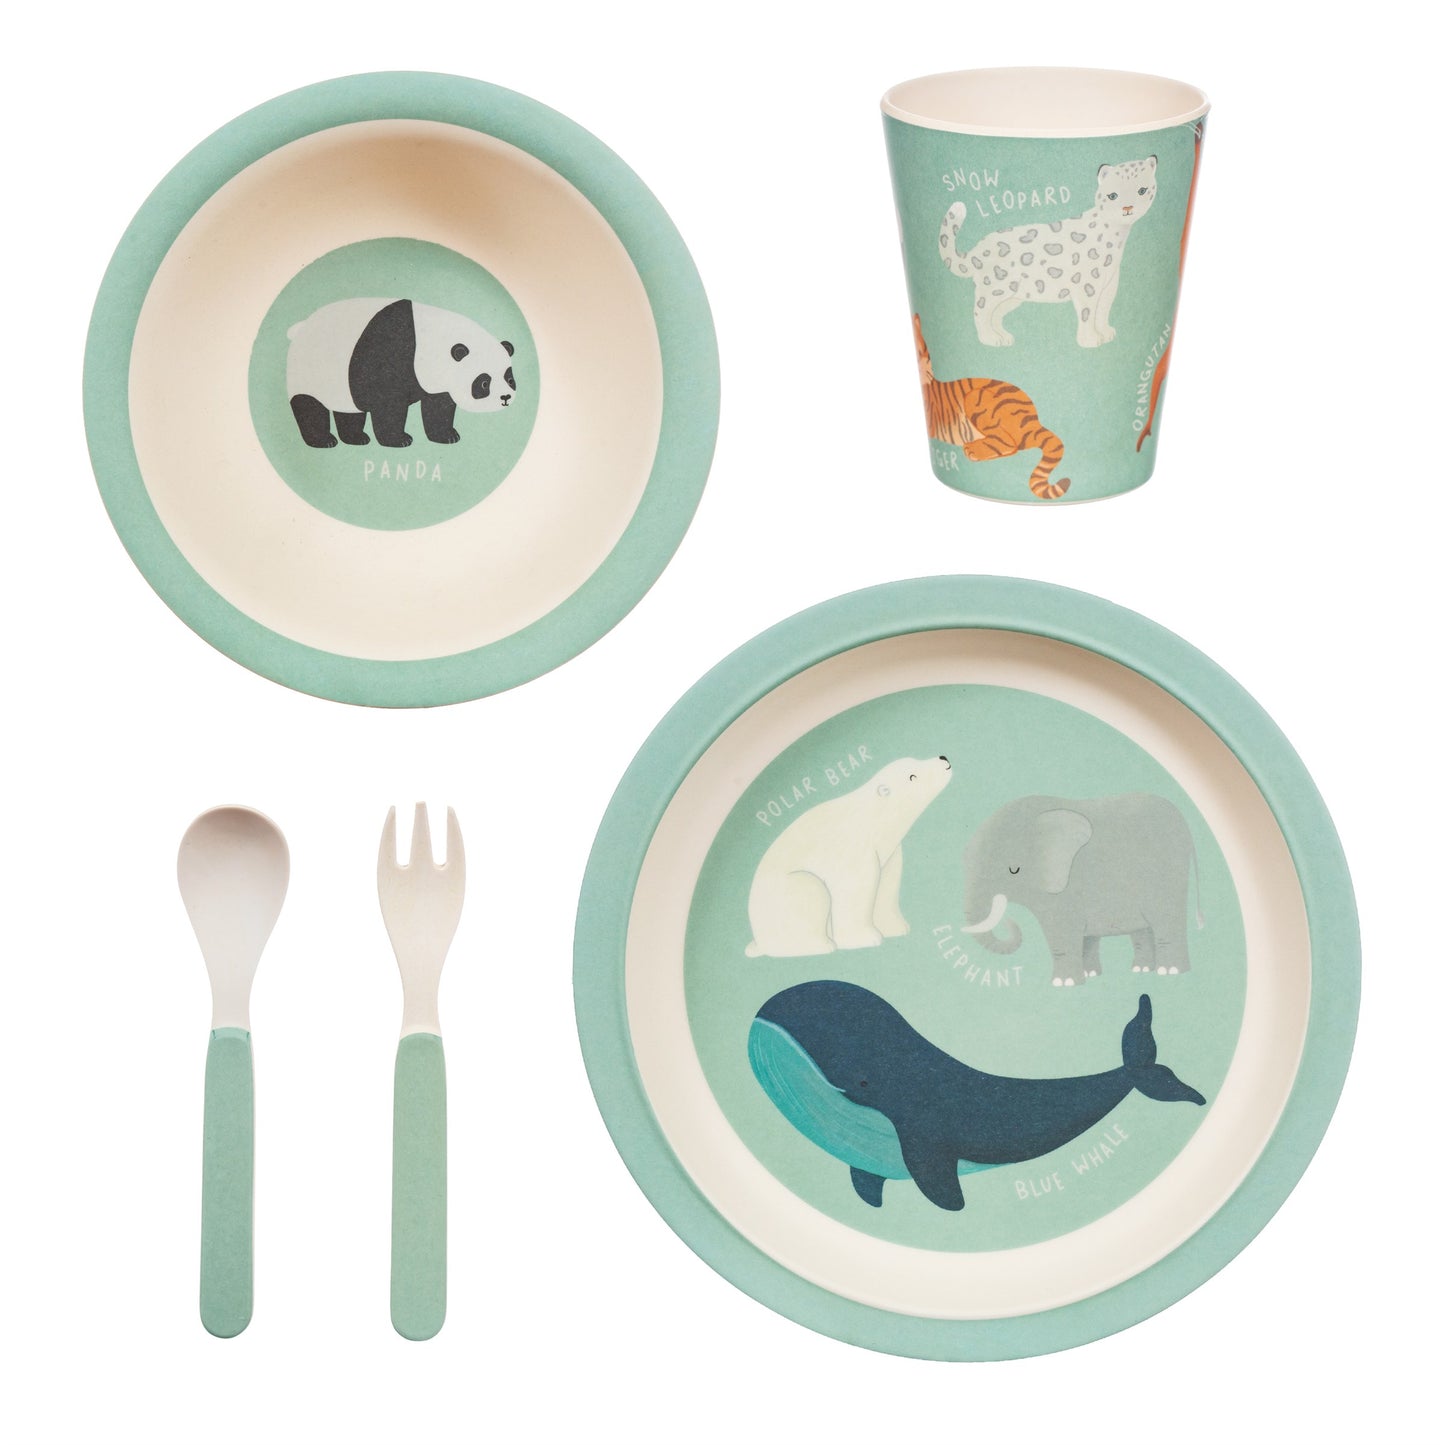 Love our animals with this bamboo tableware and cutlery set featuring a green/blue and white design with various endangered animals.